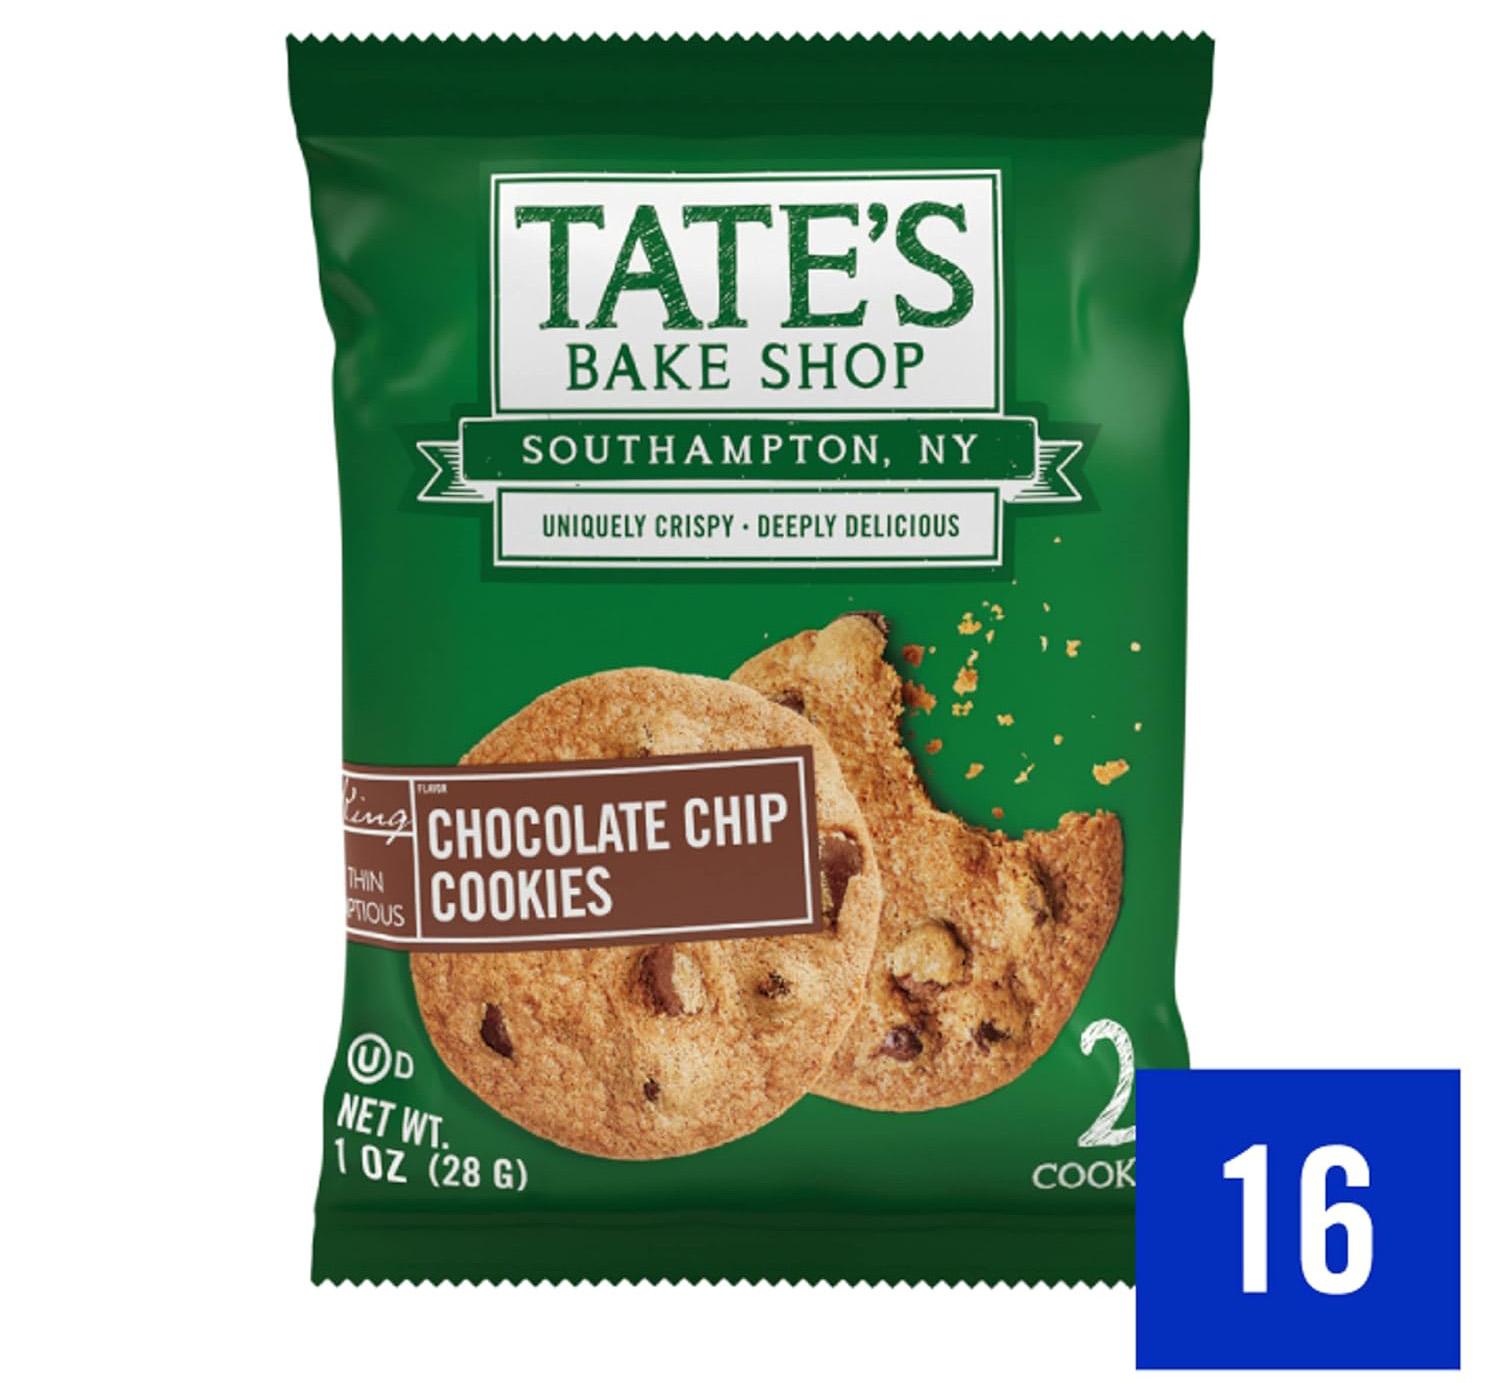 Tates Bake Shop Chocolate Chip Cookies 16 Pack for $12.55 Shipped